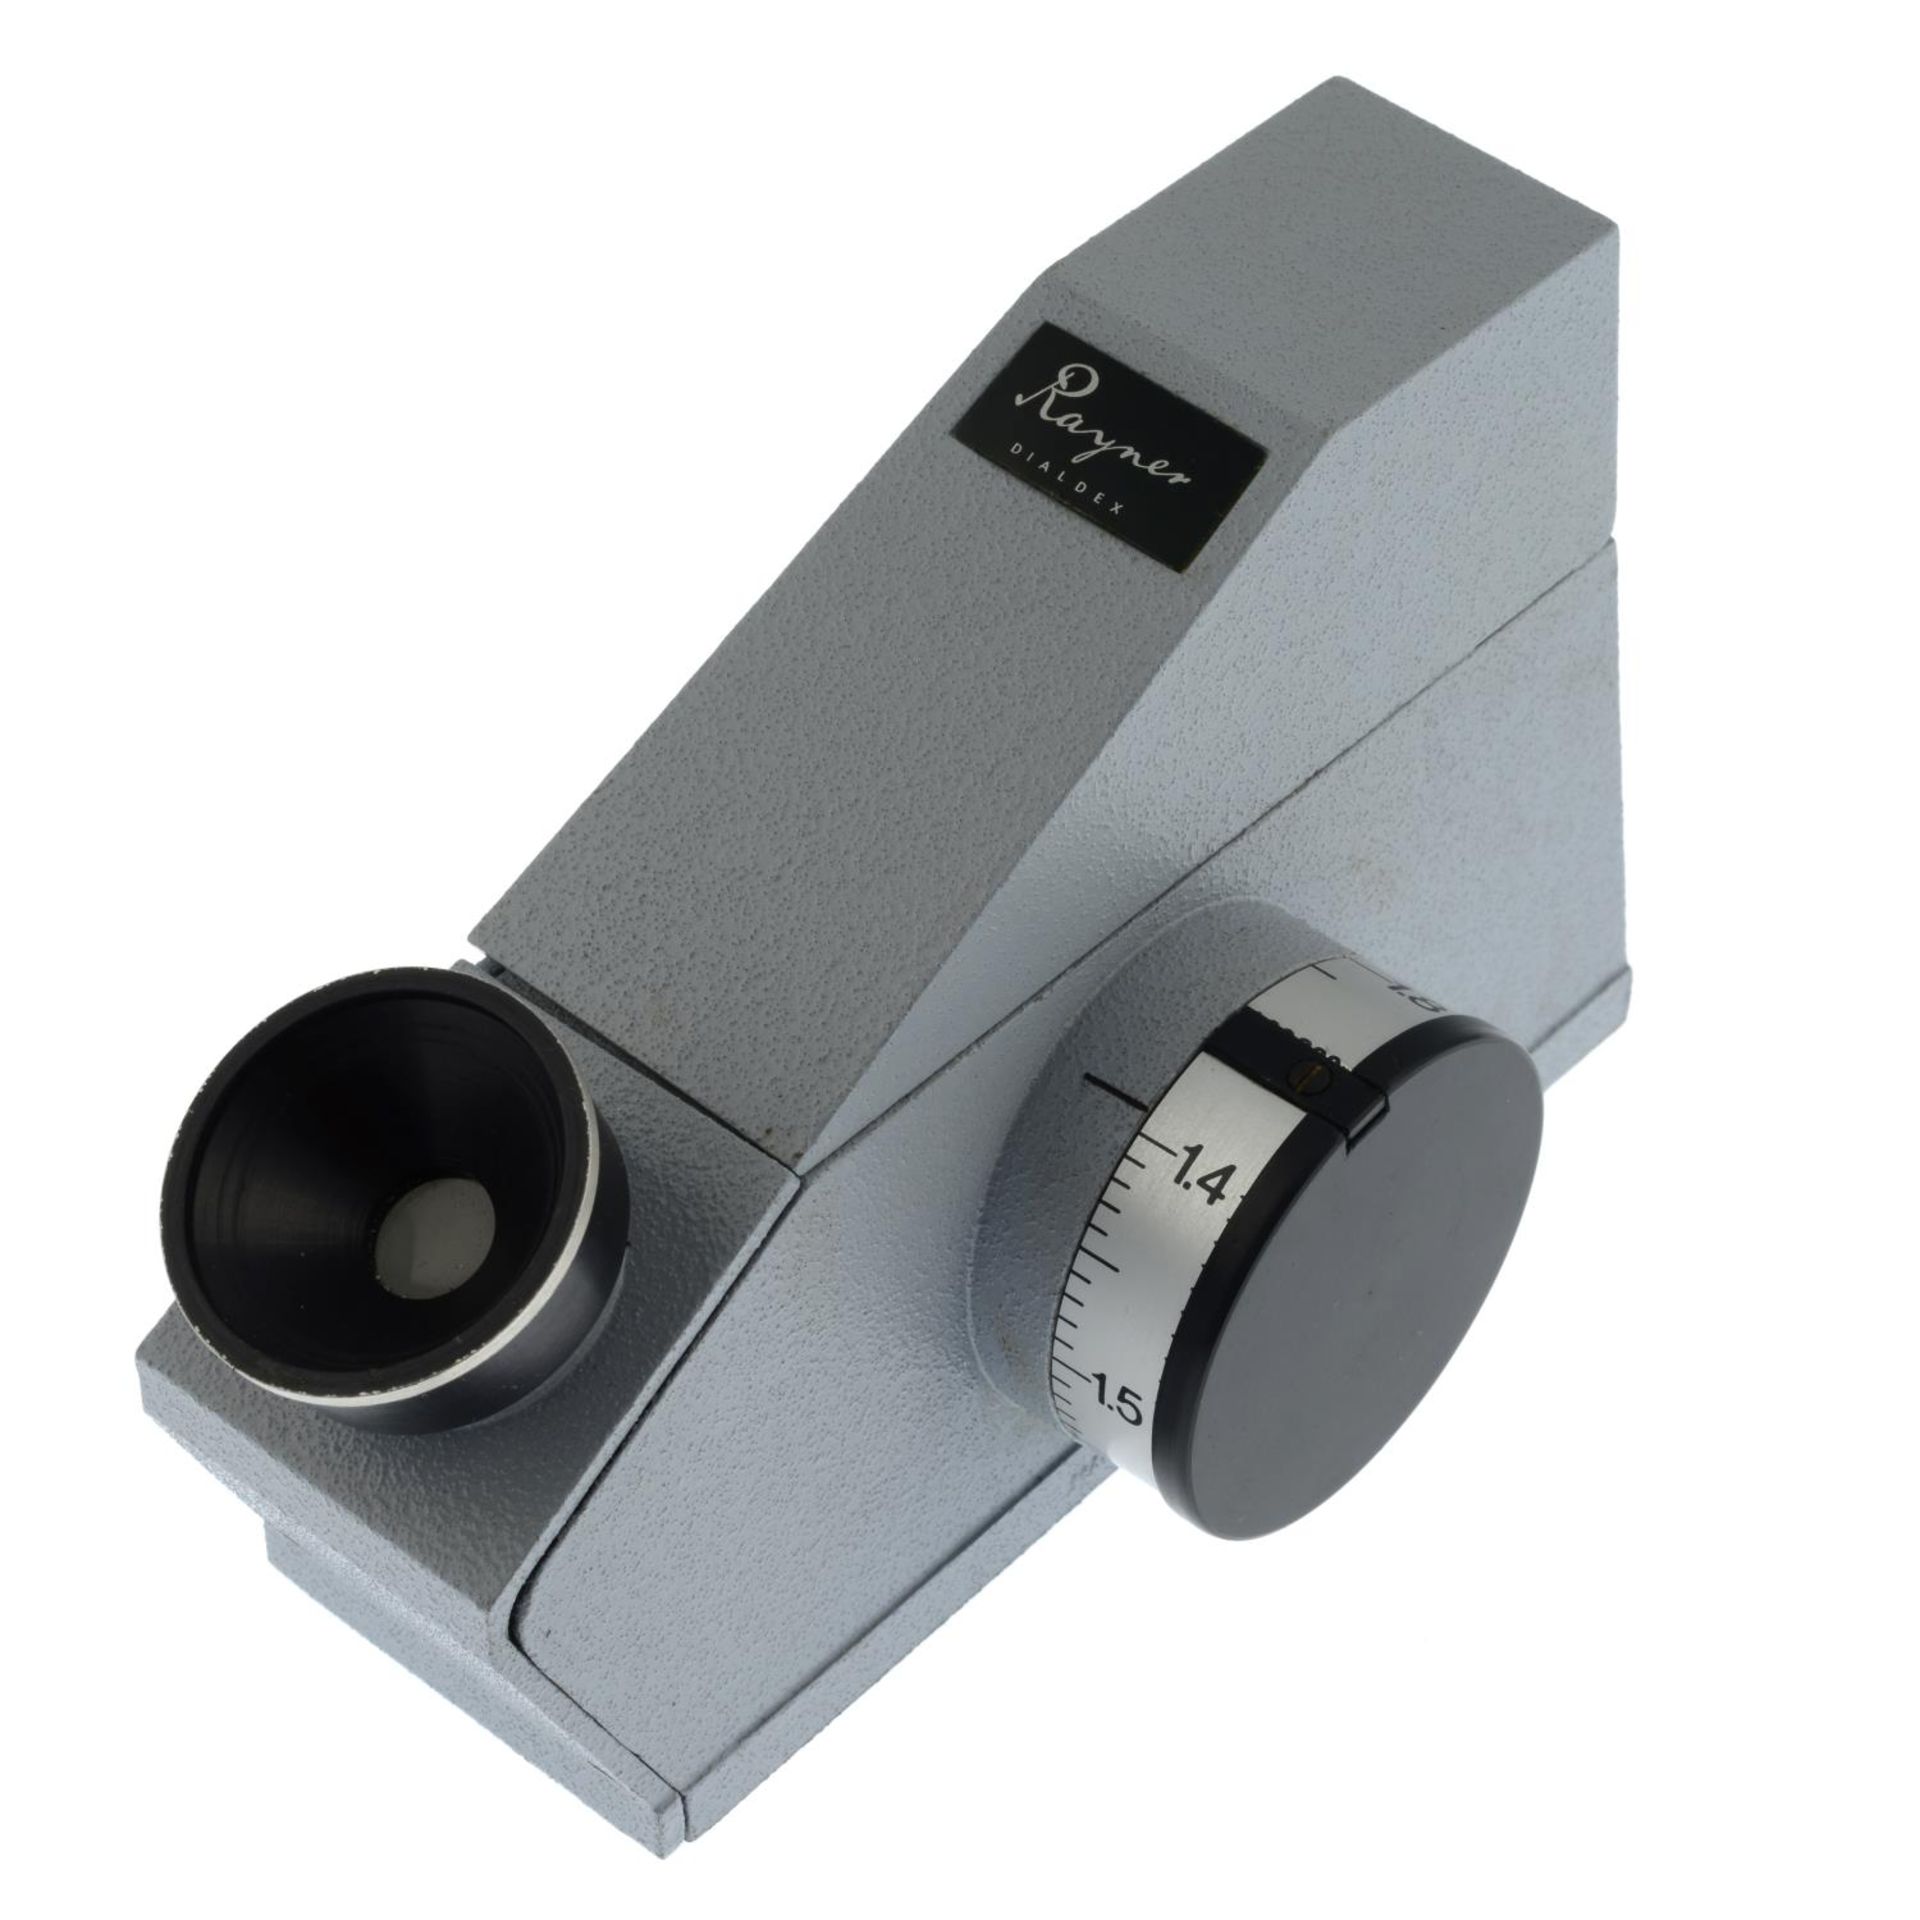 A Rayner refractometer and spectroscope, with stand.